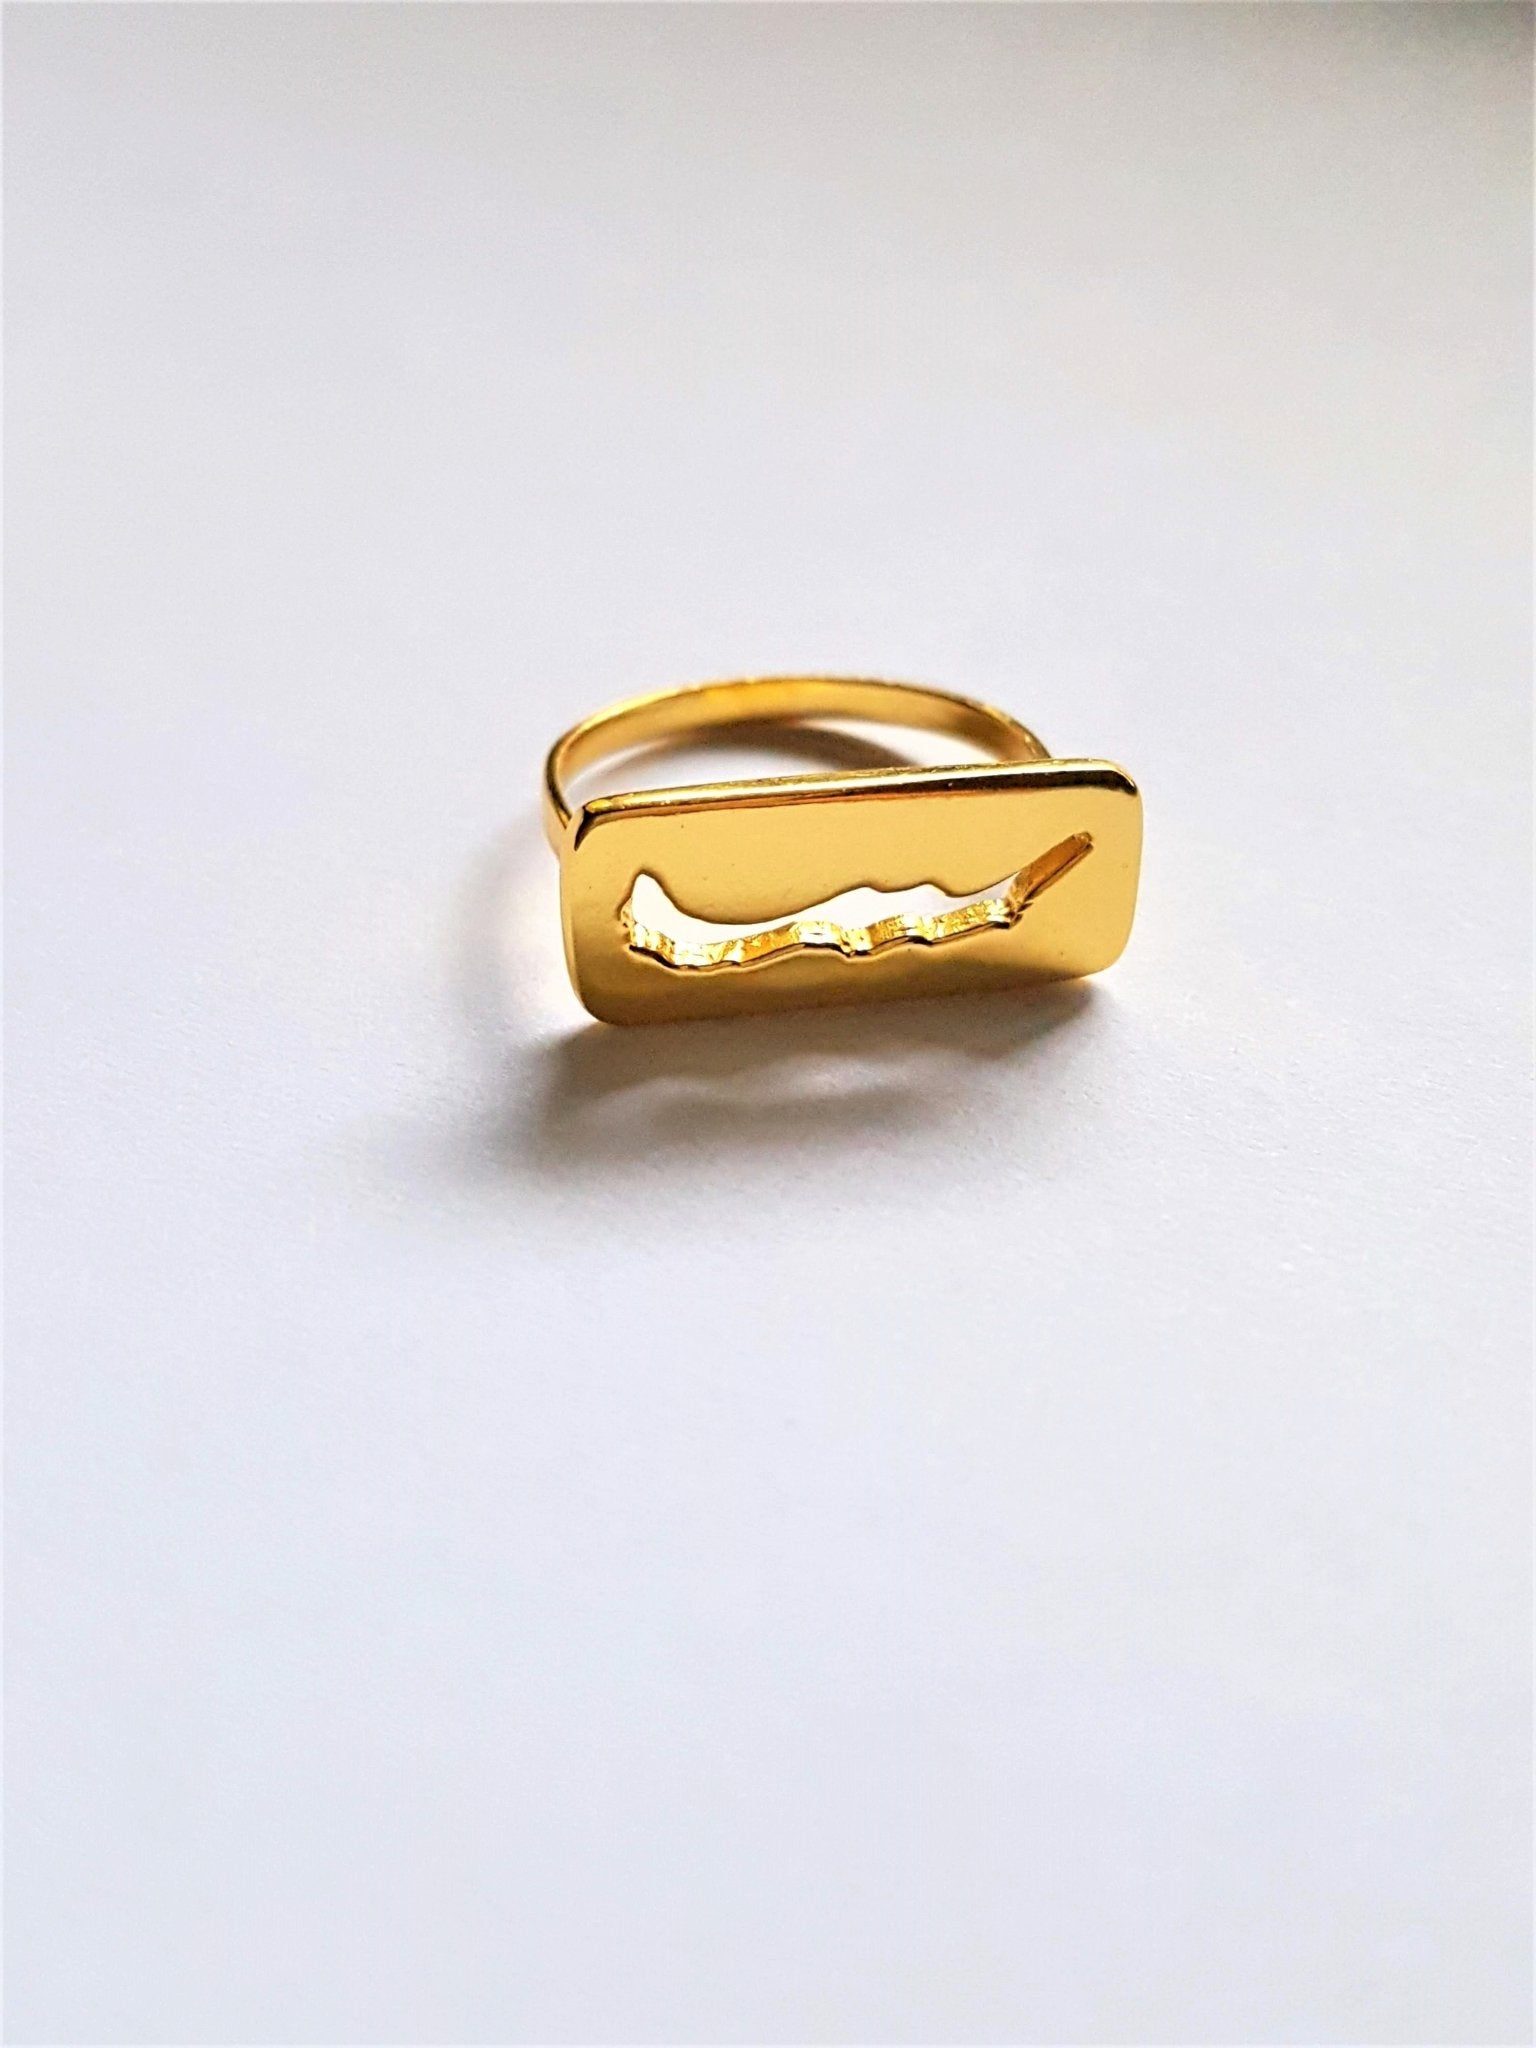 Savary island ring with savary island shape cut out of rectangle